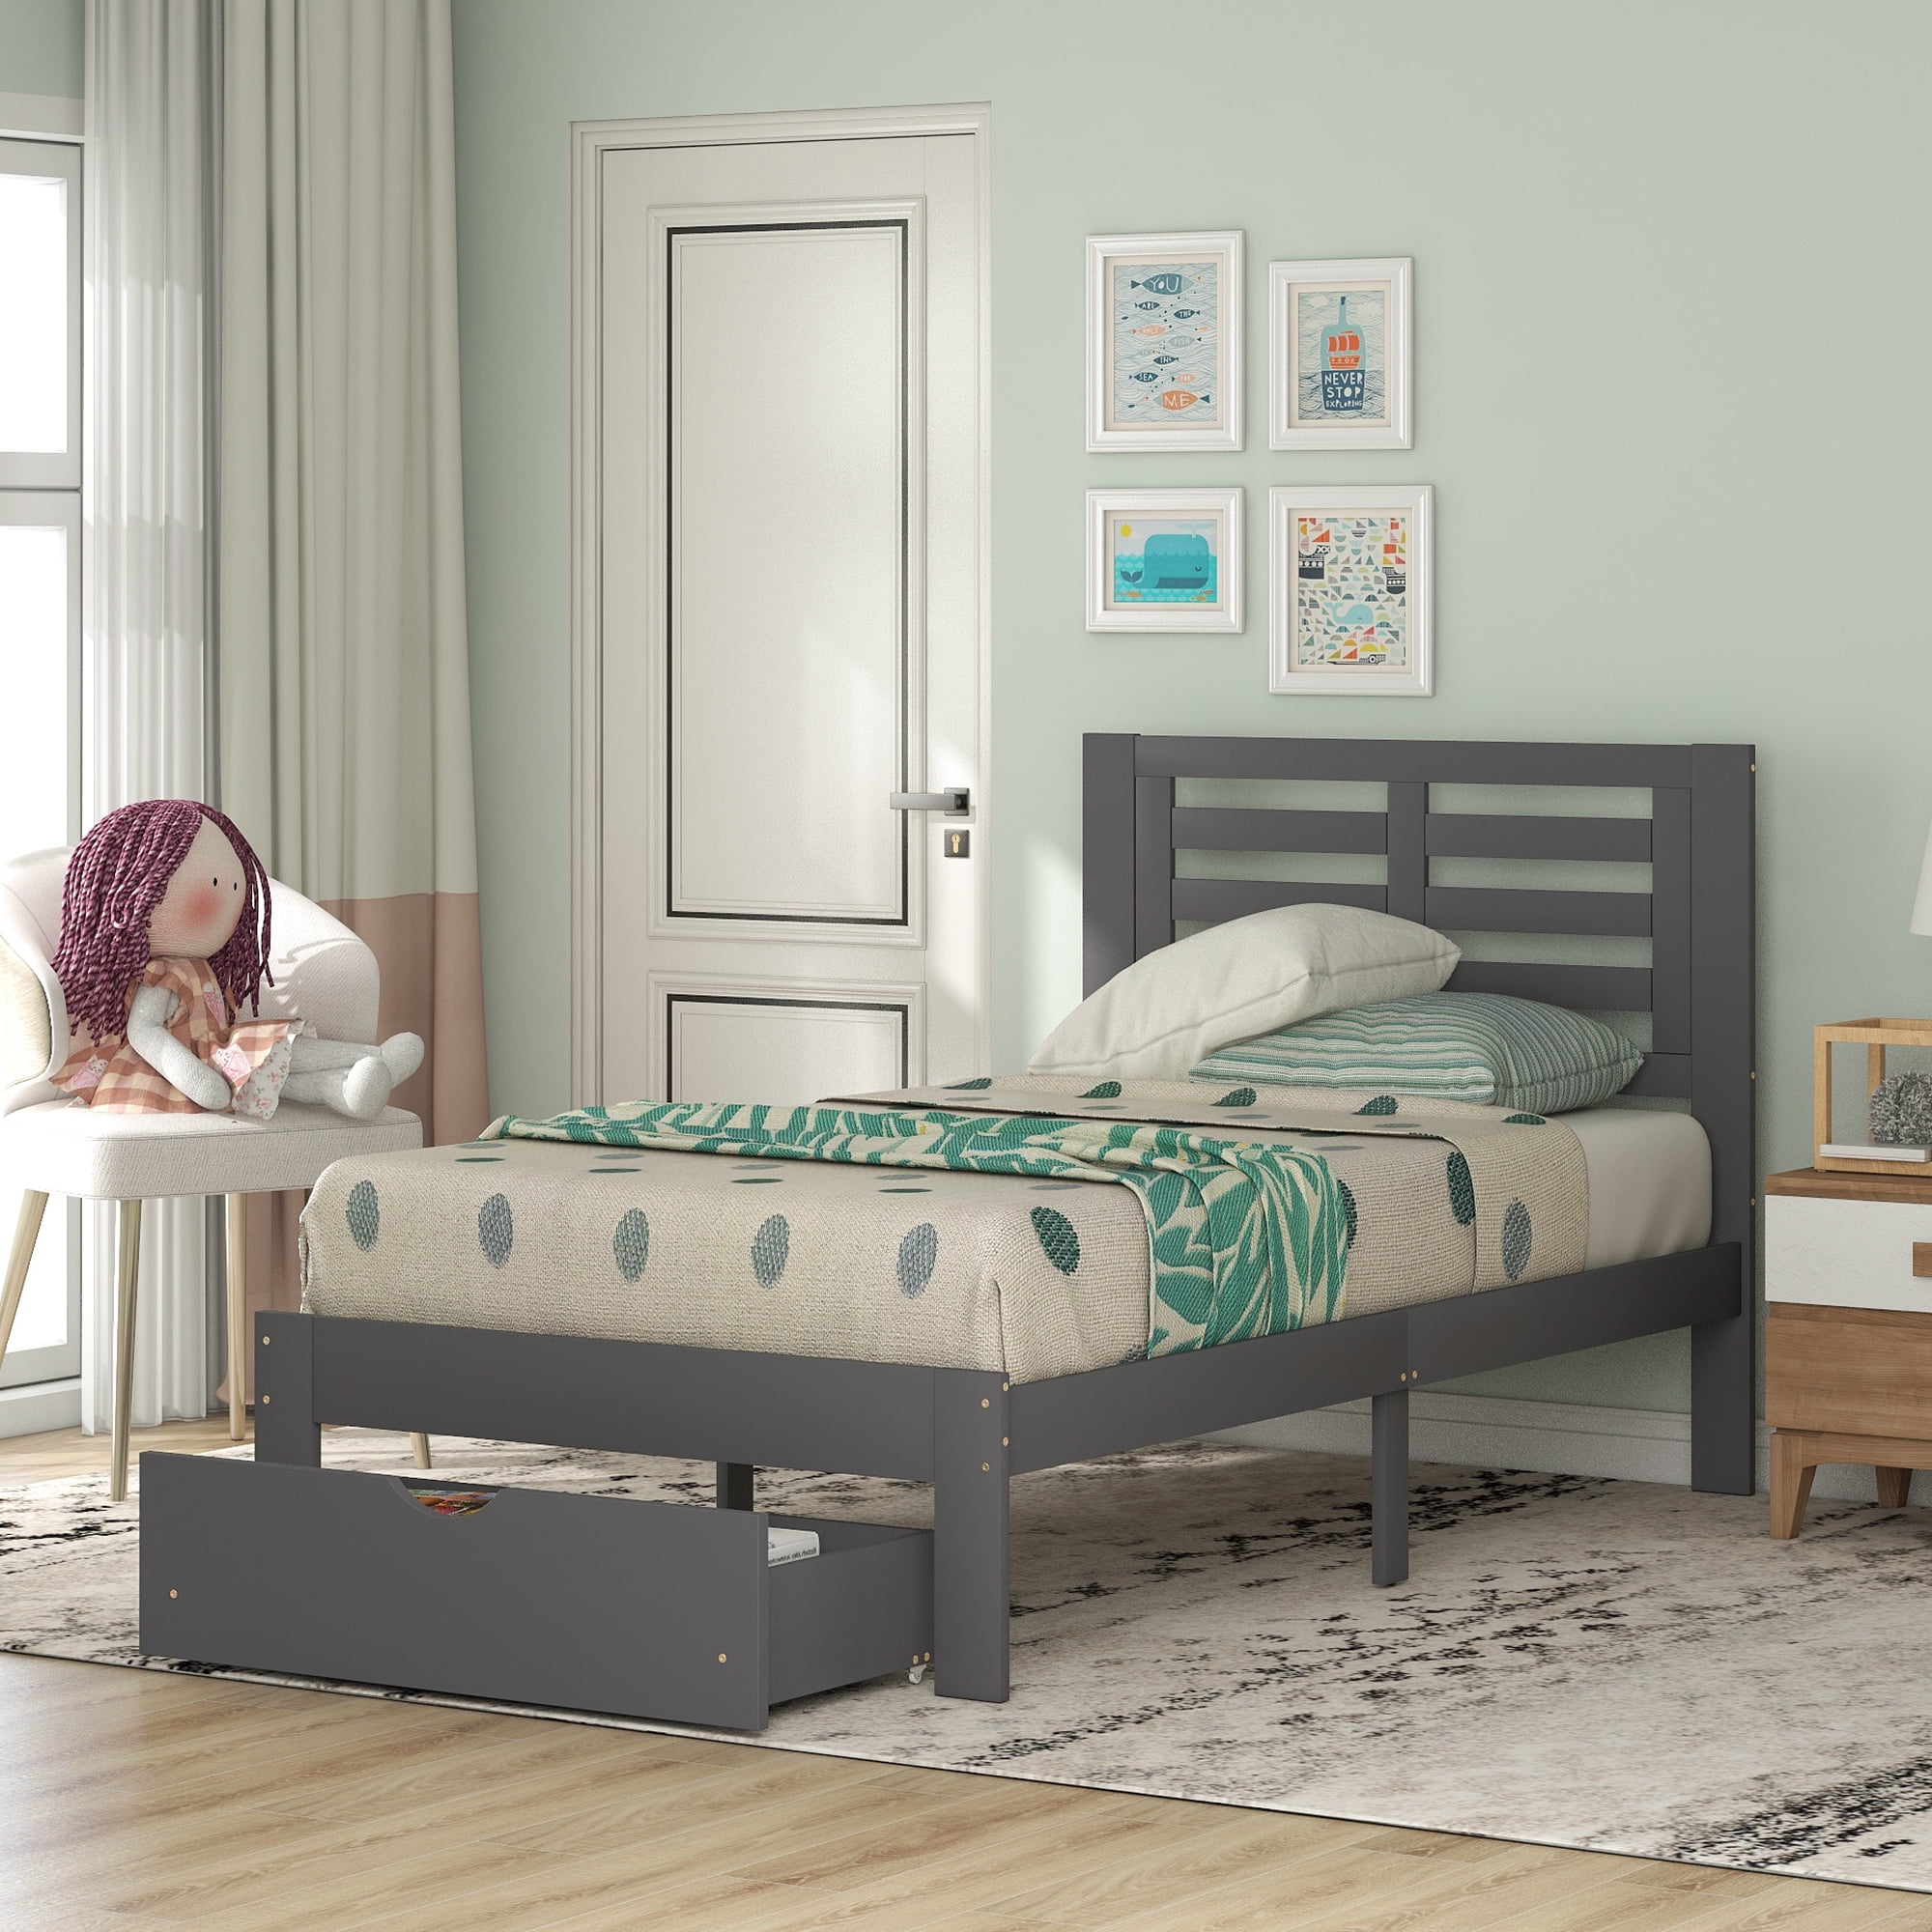 Twin Bed Frame For Kids S Upgrade, Pine Twin Beds With Storage Drawers